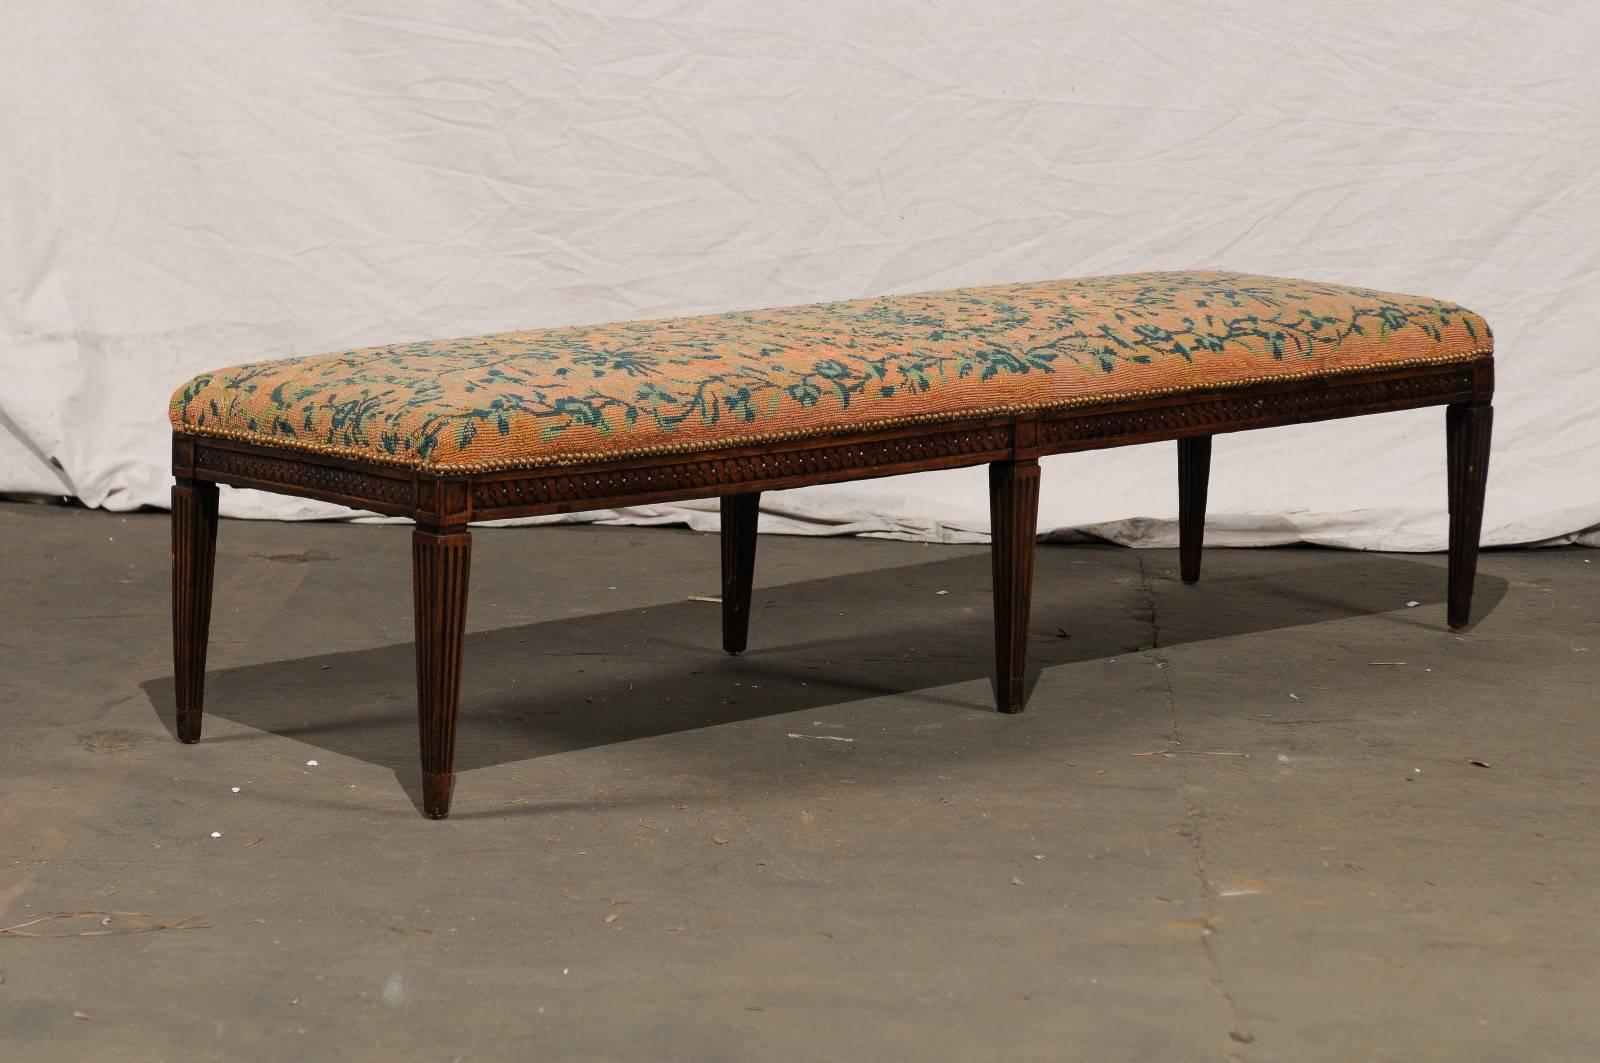 Carved 19th Century Long Italian Bench with Needlepoint